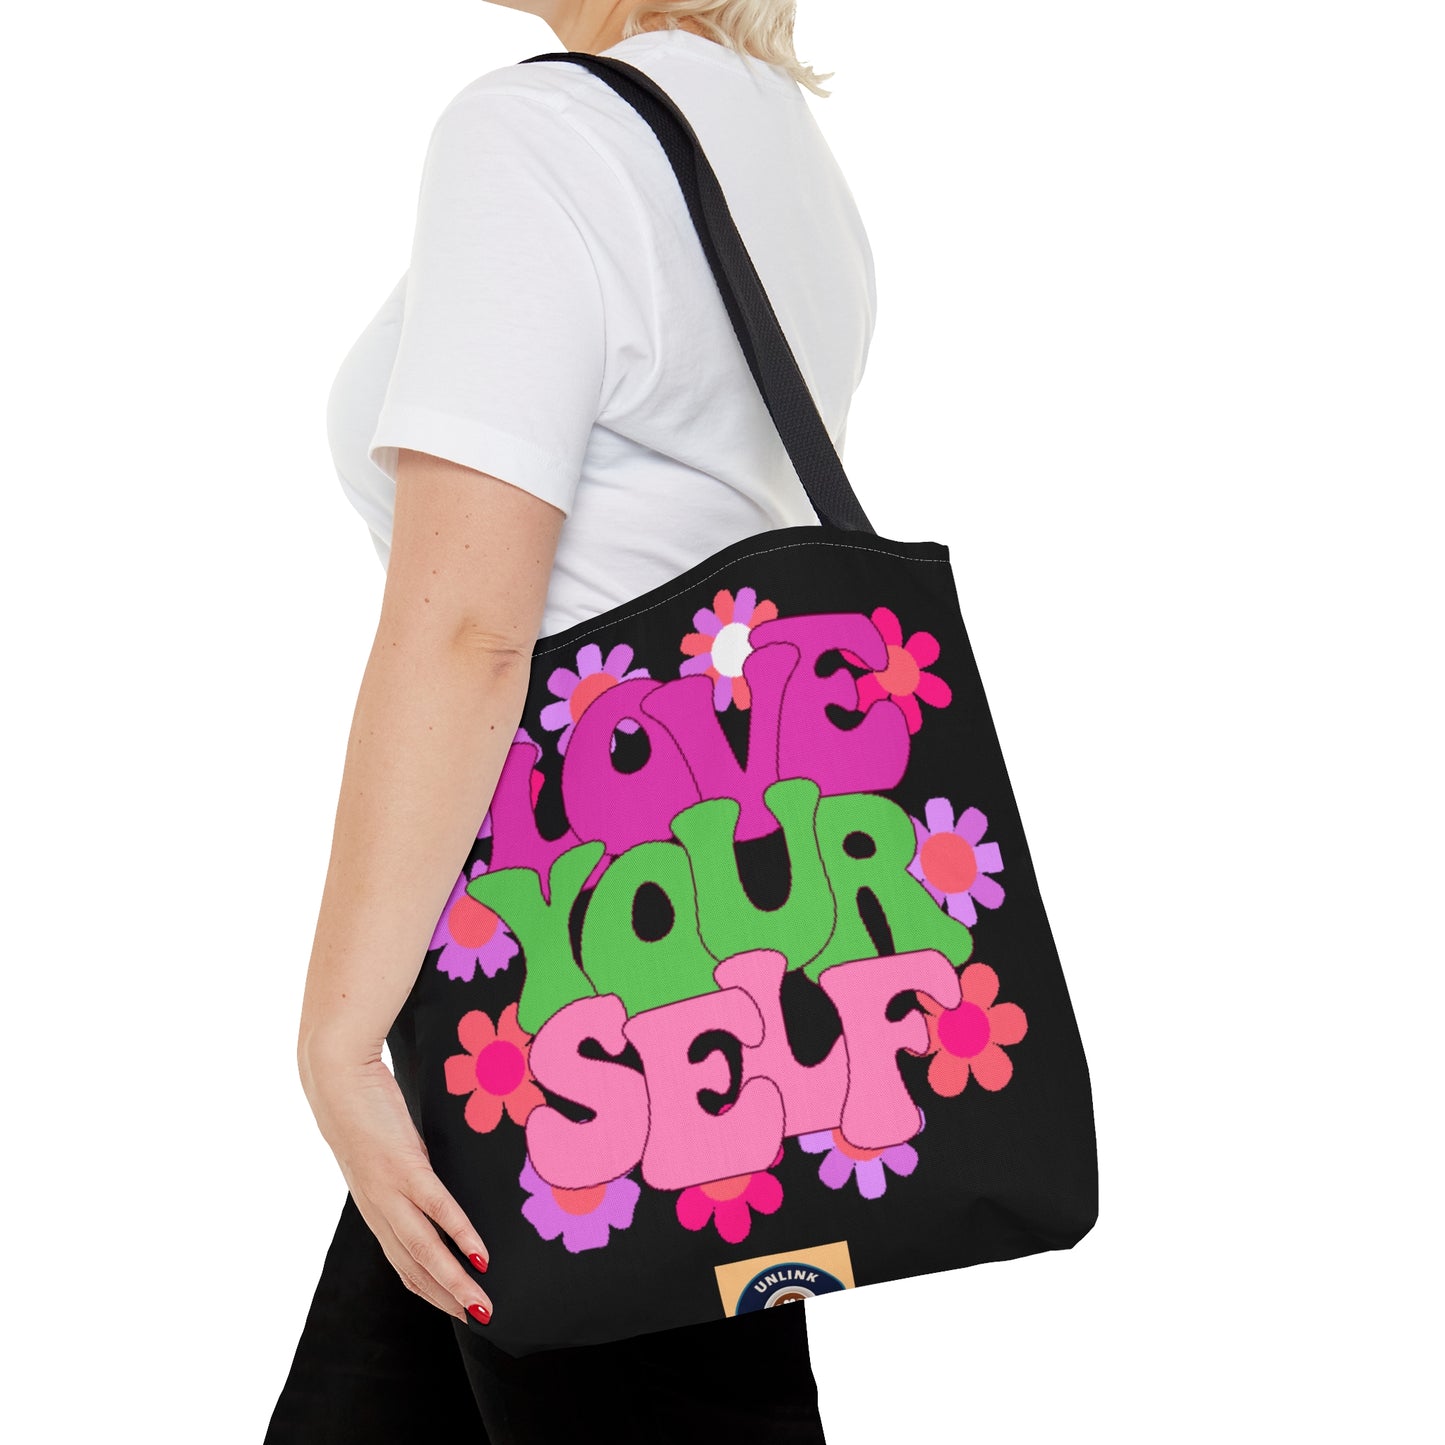 Colorful and bright “LOVE YOURSELF” tote bag. Come in 3 sizes to meet your needs. Reusable for all your shopping or trip needs.